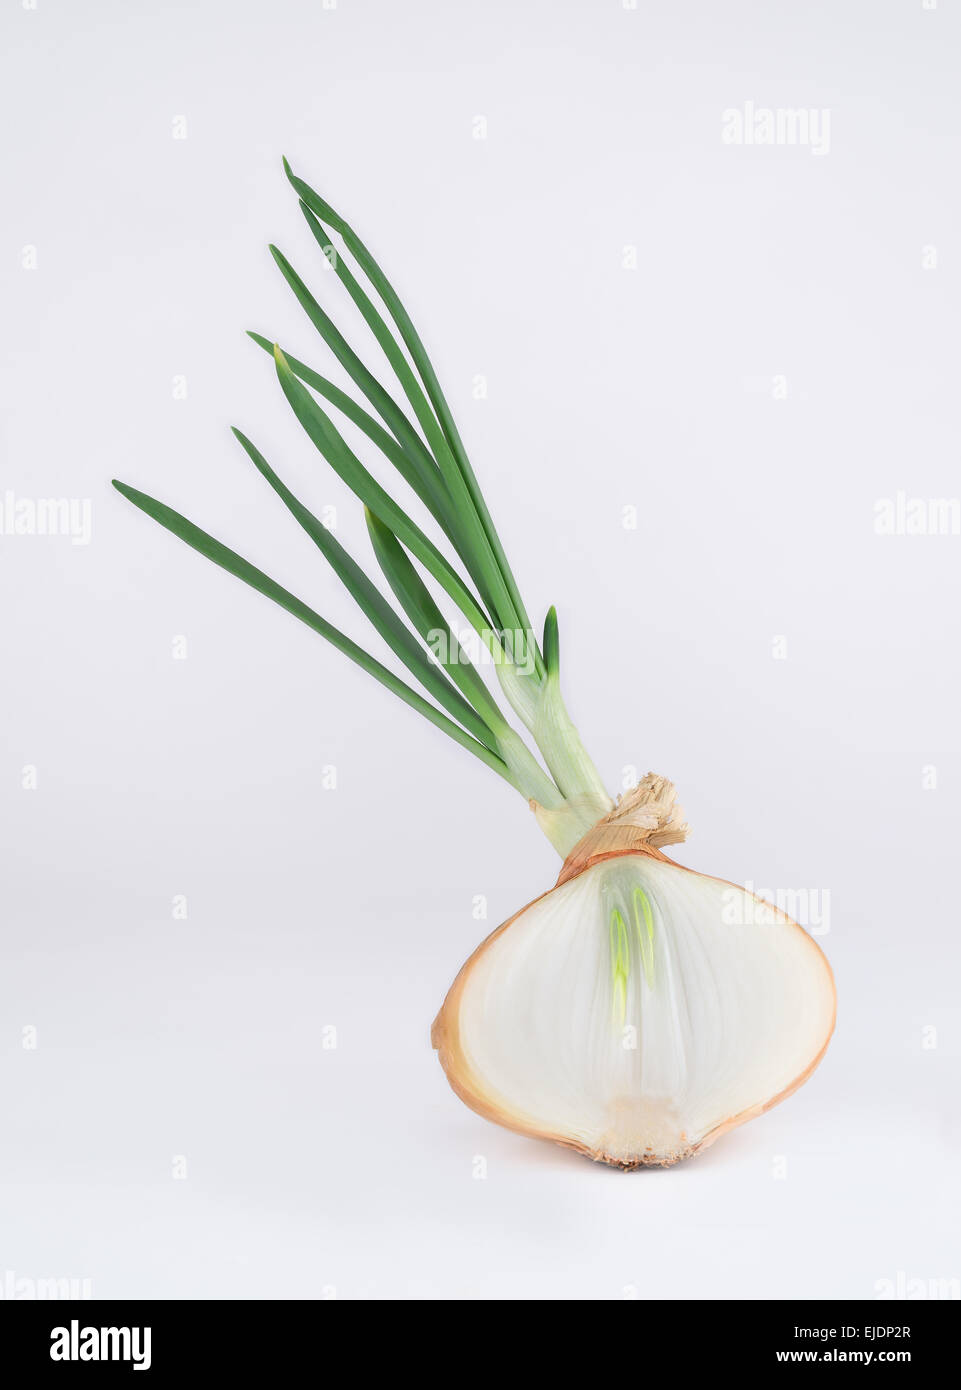 An onion bulb sprouting with large green sprouts, cut in half, on a white background. Stock Photo